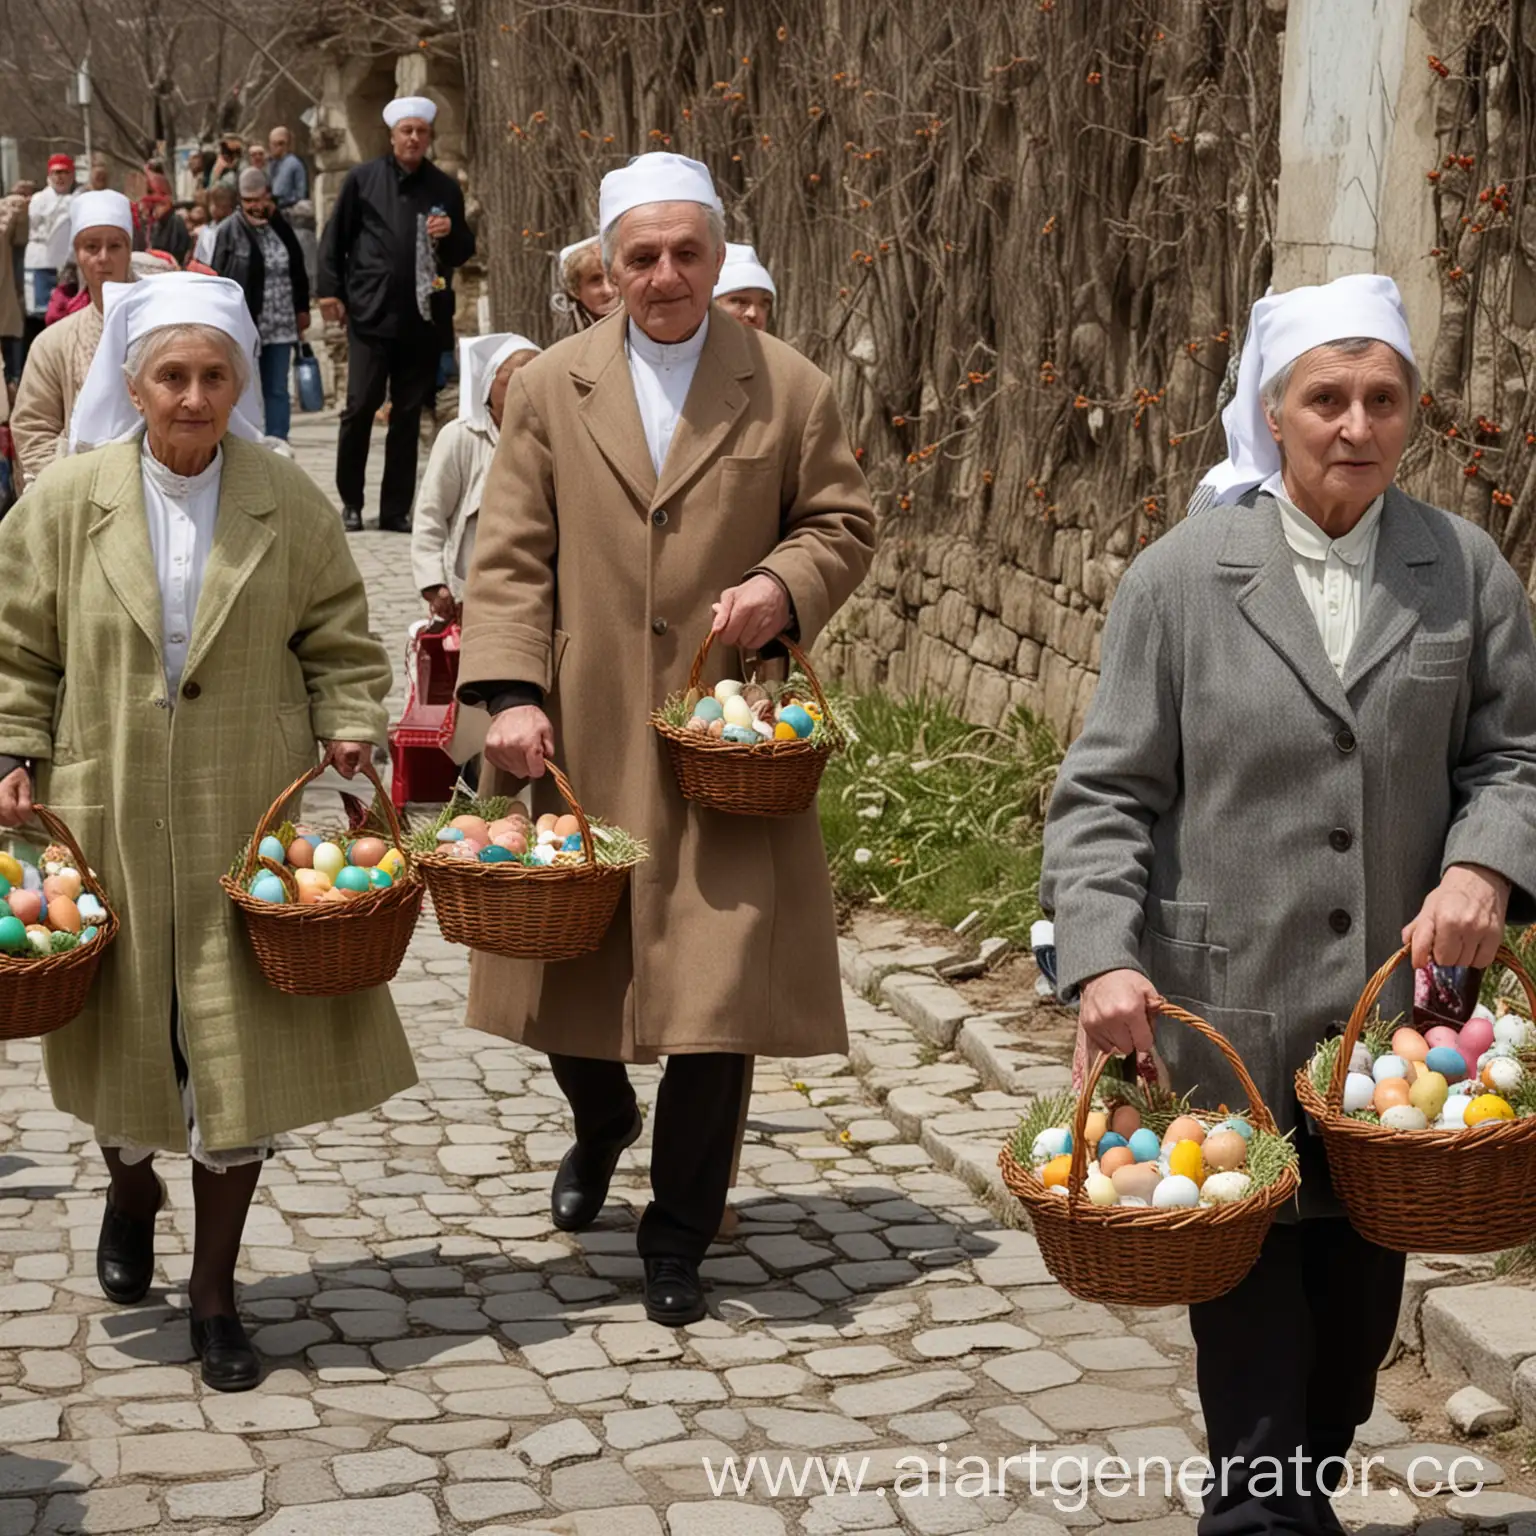 Easter-Morning-Celebration-in-Yalta-People-Carrying-Kuliches-and-Eggs